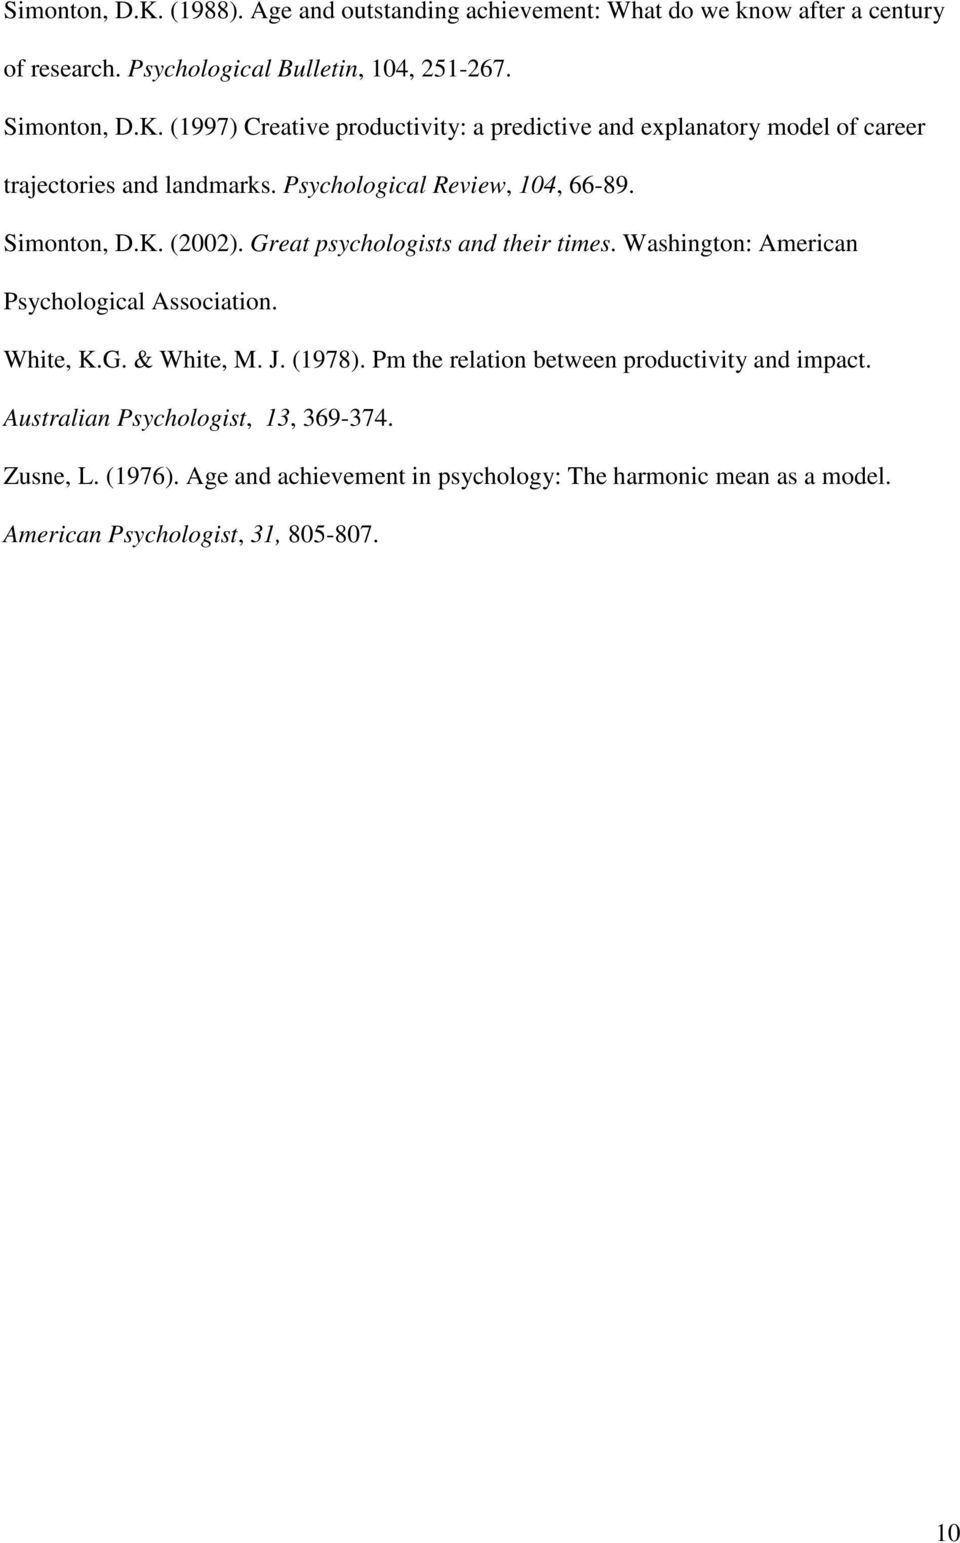 J. (1978). Pm the relation between productivity and impact. Australian Psychologist, 13, 369-374. Zusne, L. (1976).